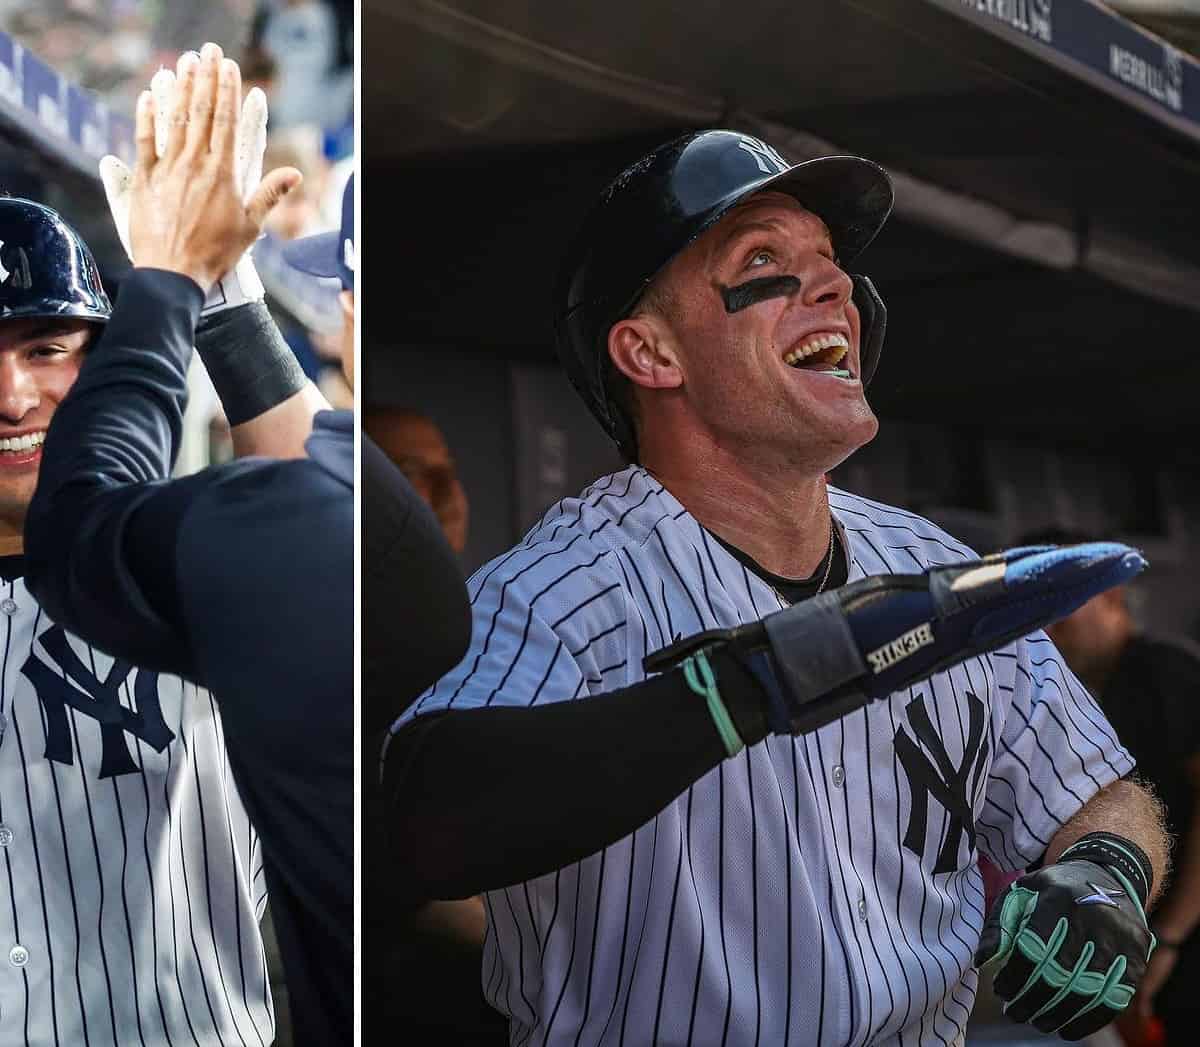 Yankees ride impressive batting to top the MLB standings